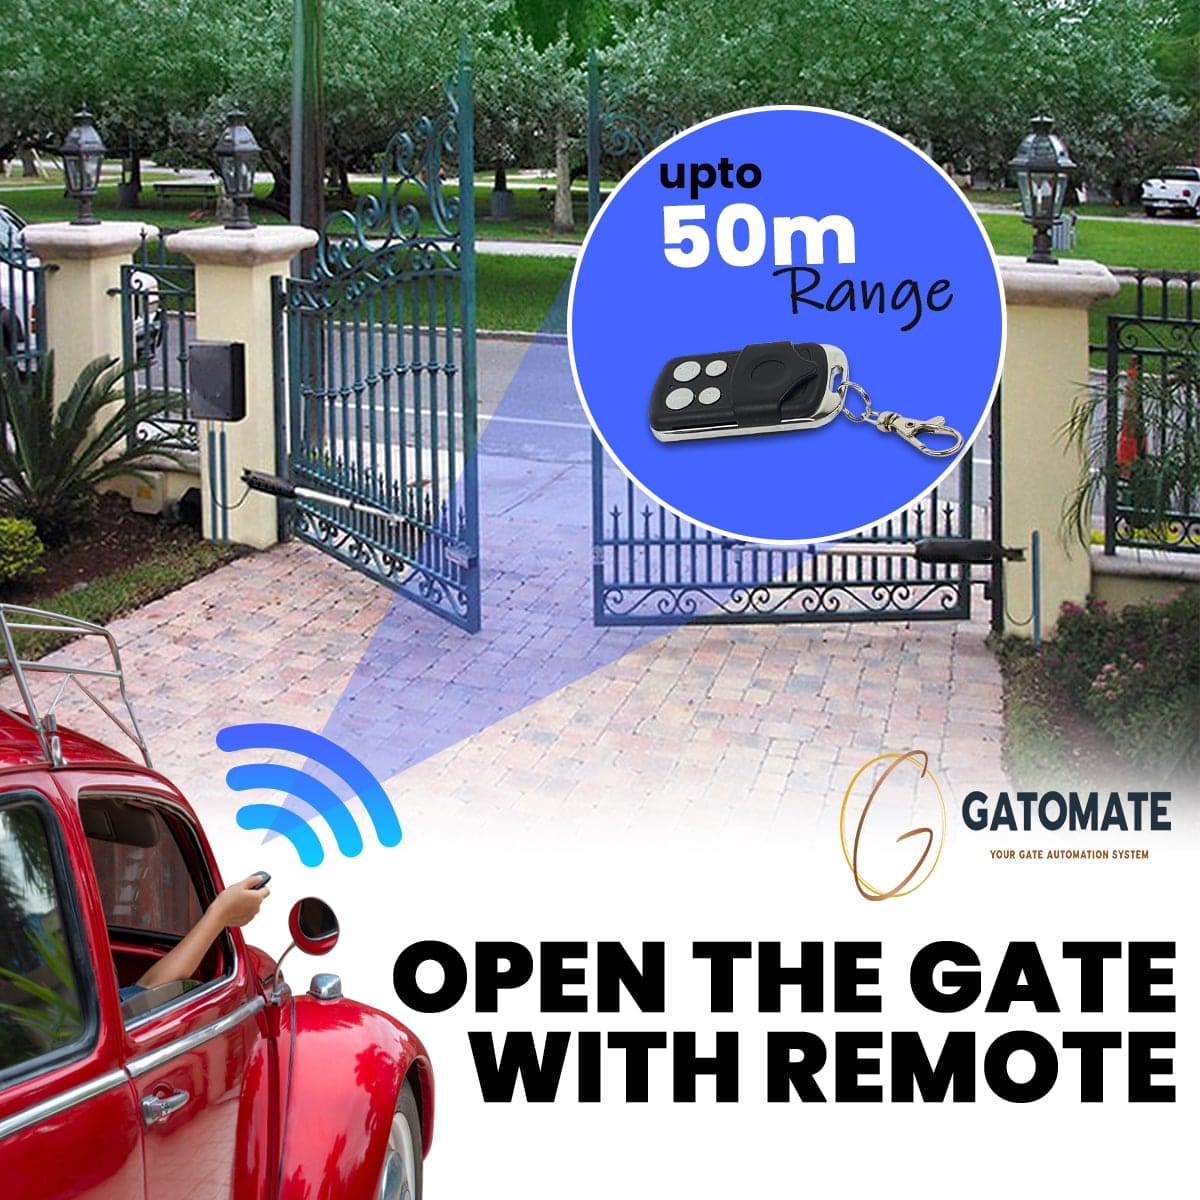 Remote control, for Mogtol gate opener, gatomate